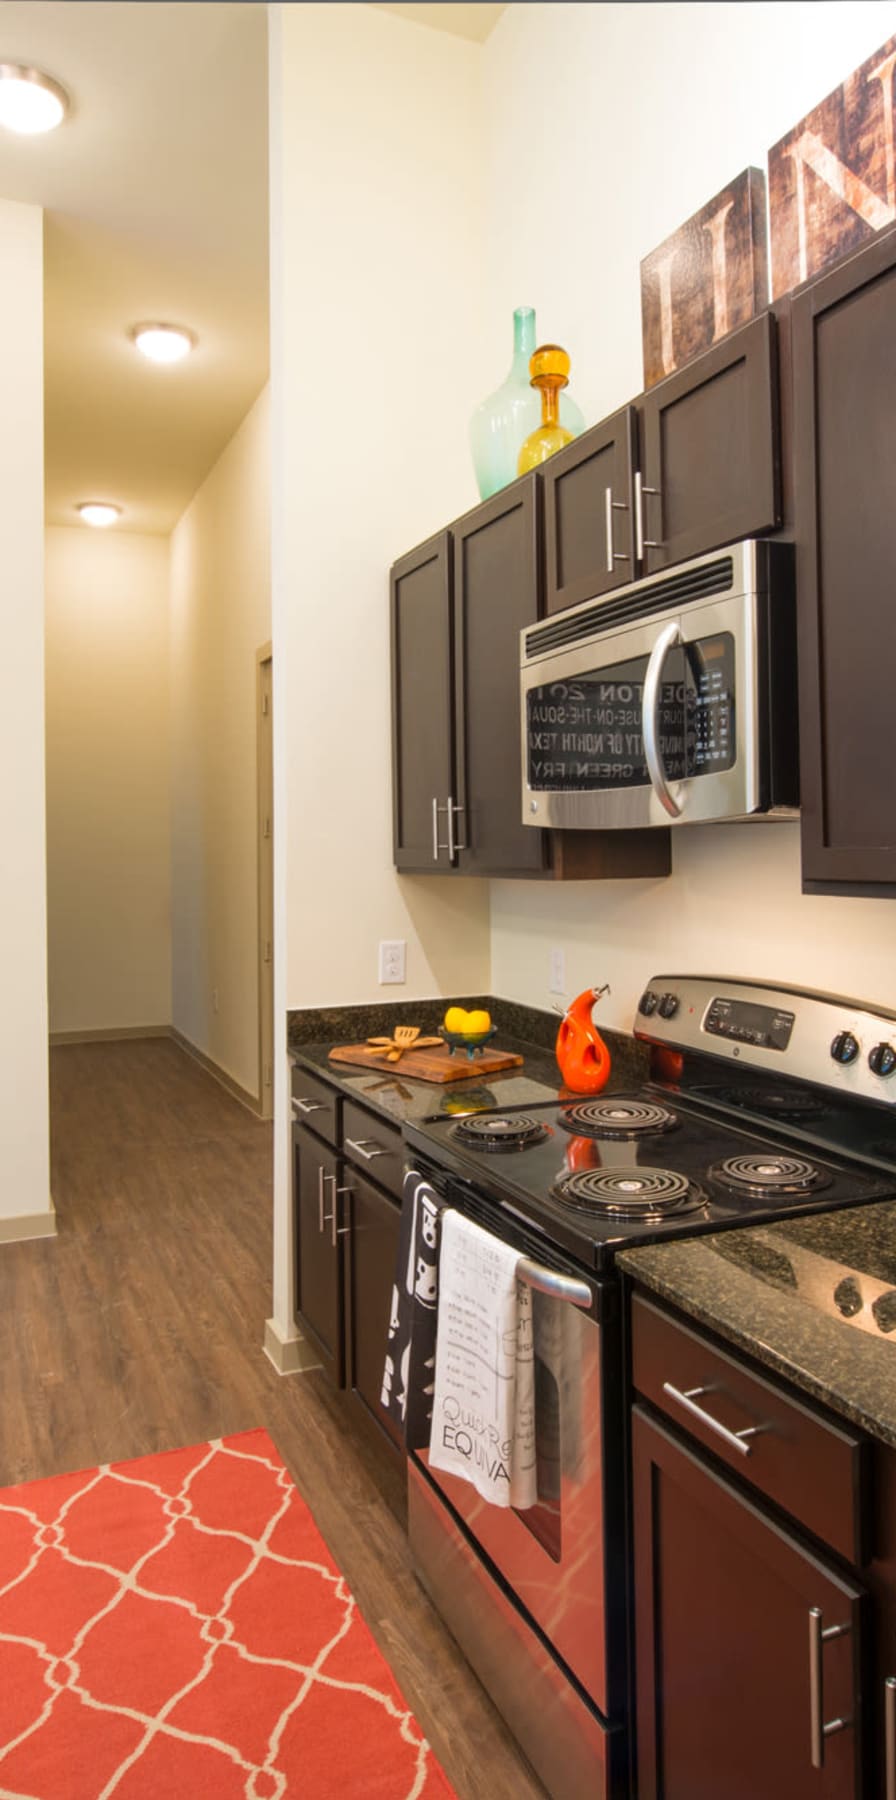 Modern kitchen in a model student apartment at 33 North in Denton, Texas